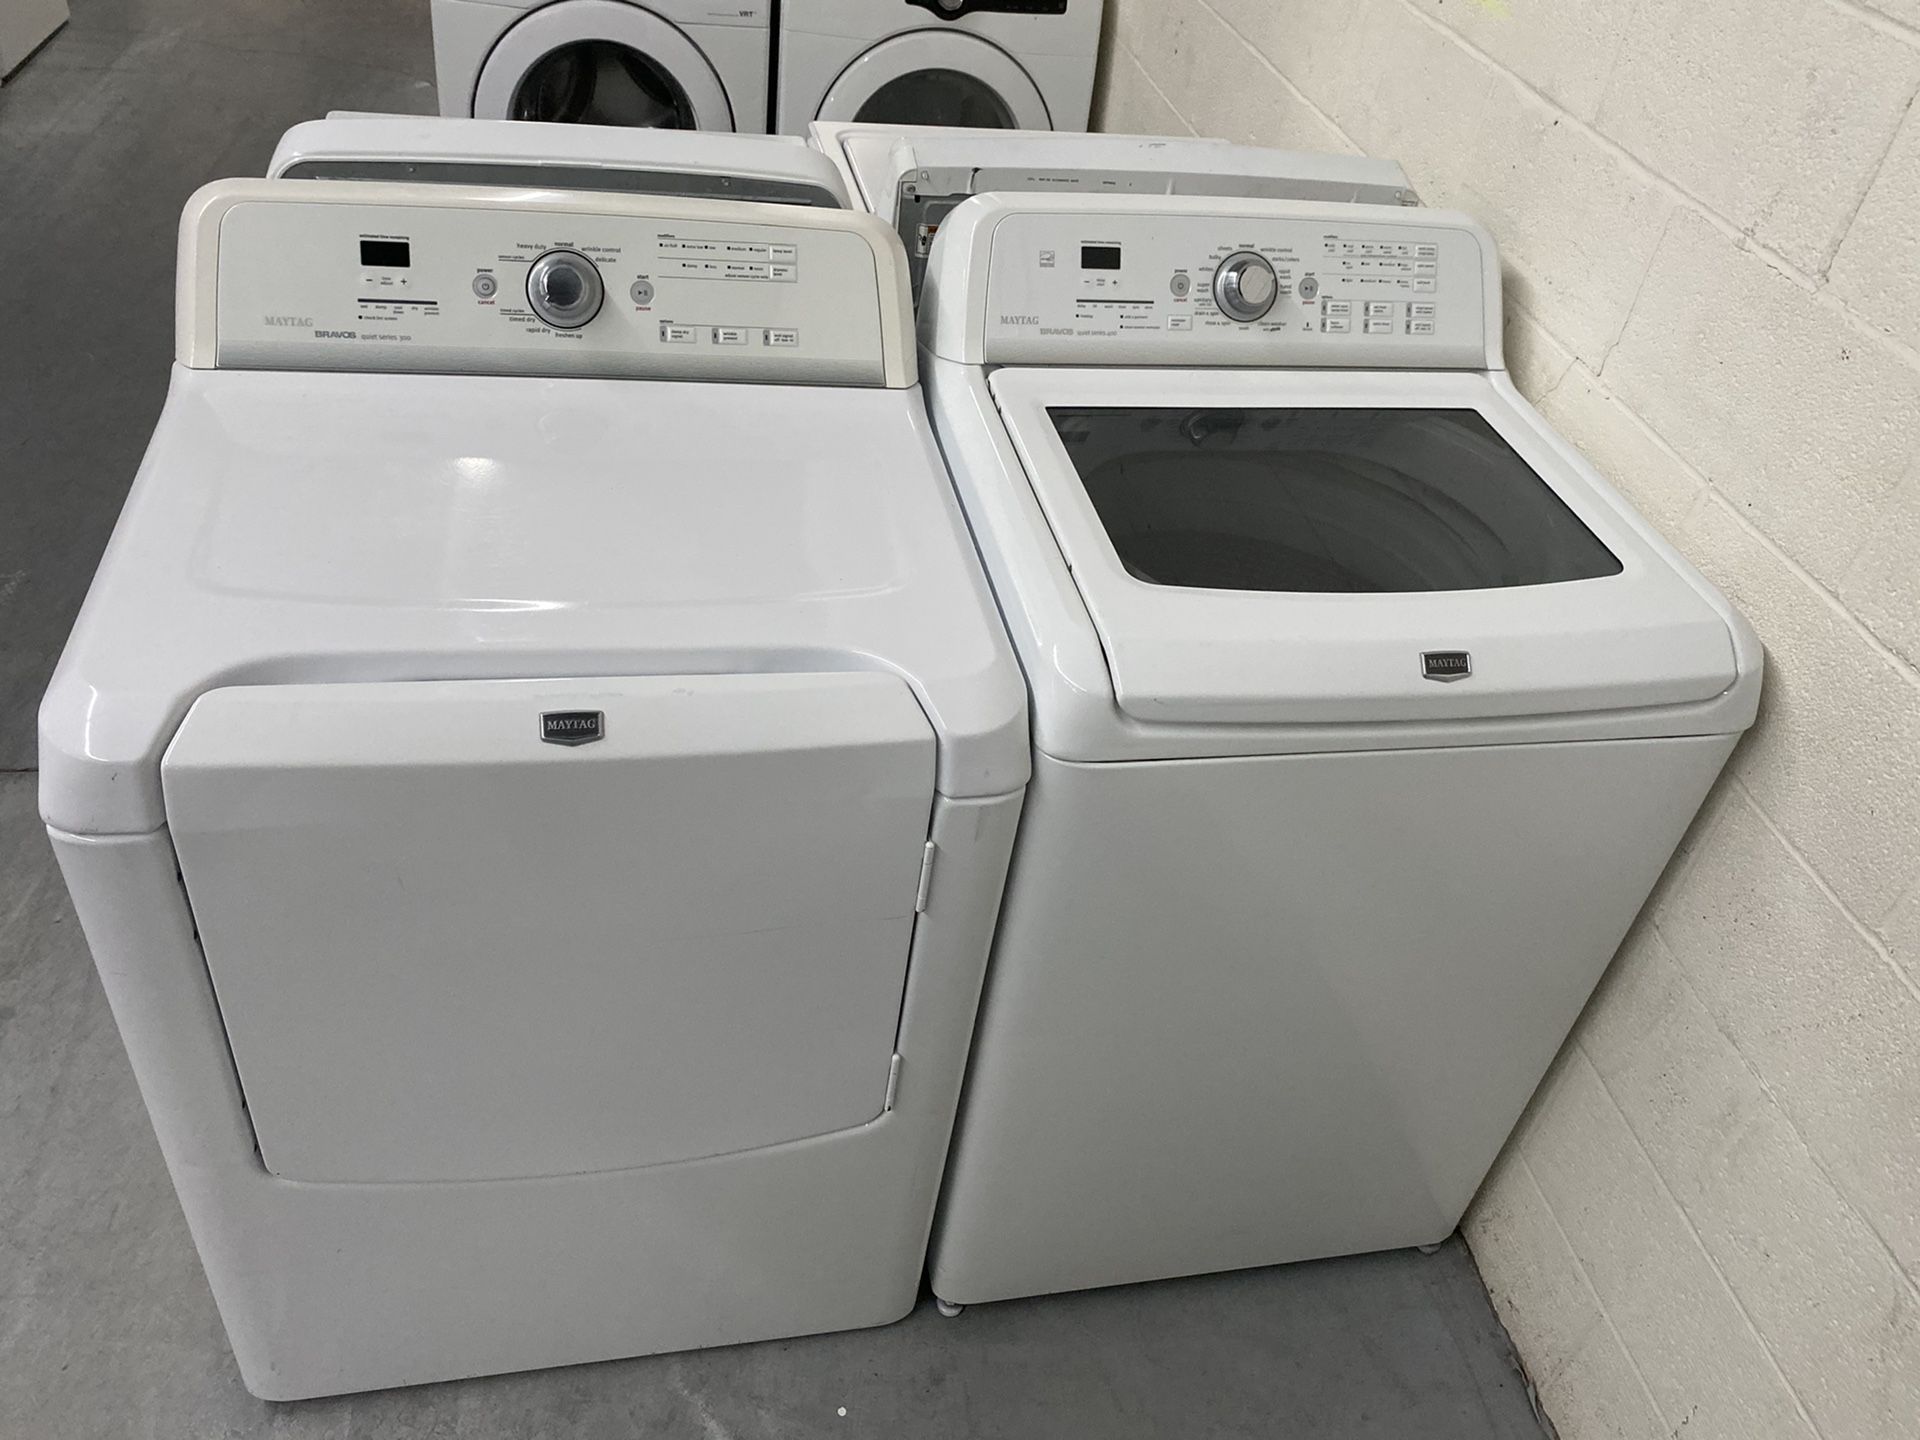 Maytag Bravos h/e washer and dryer set